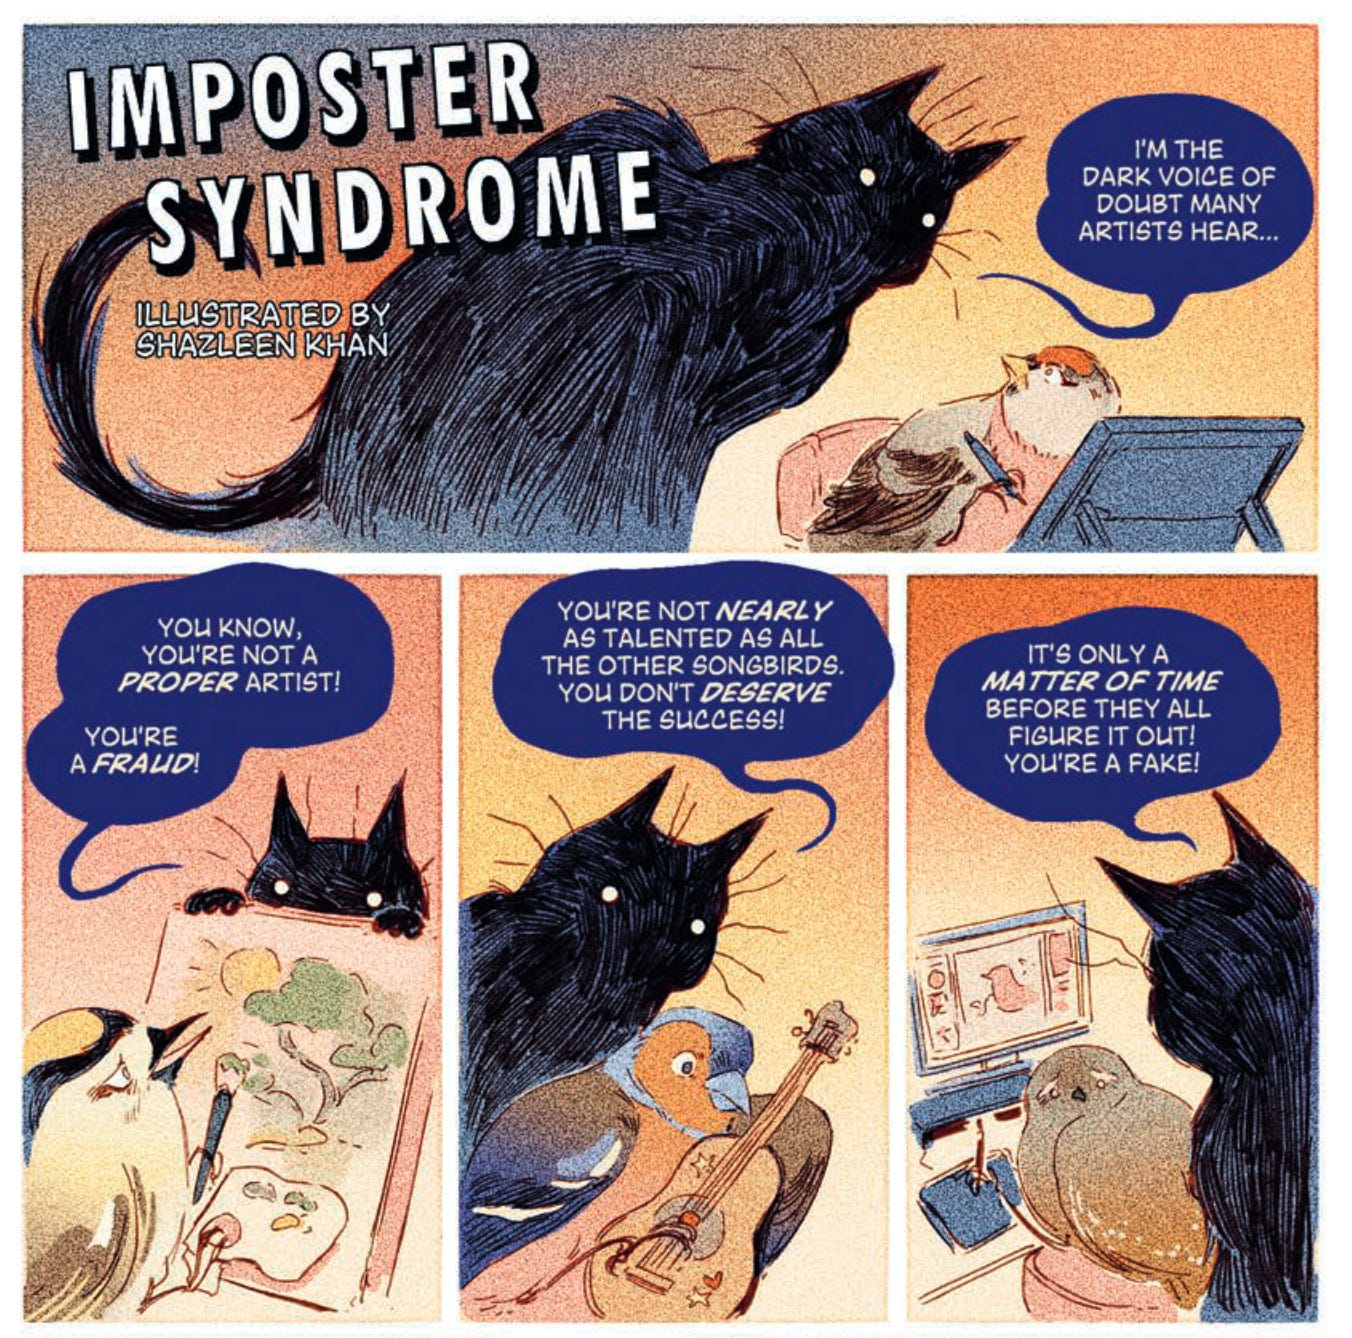 Panels from the comic ‘Imposter Syndrome’ illustrated by Shazleen Khan. Beautiful pencils drawings show birds tormented by a black cat. The cat voices the birds darkest fears about their art.